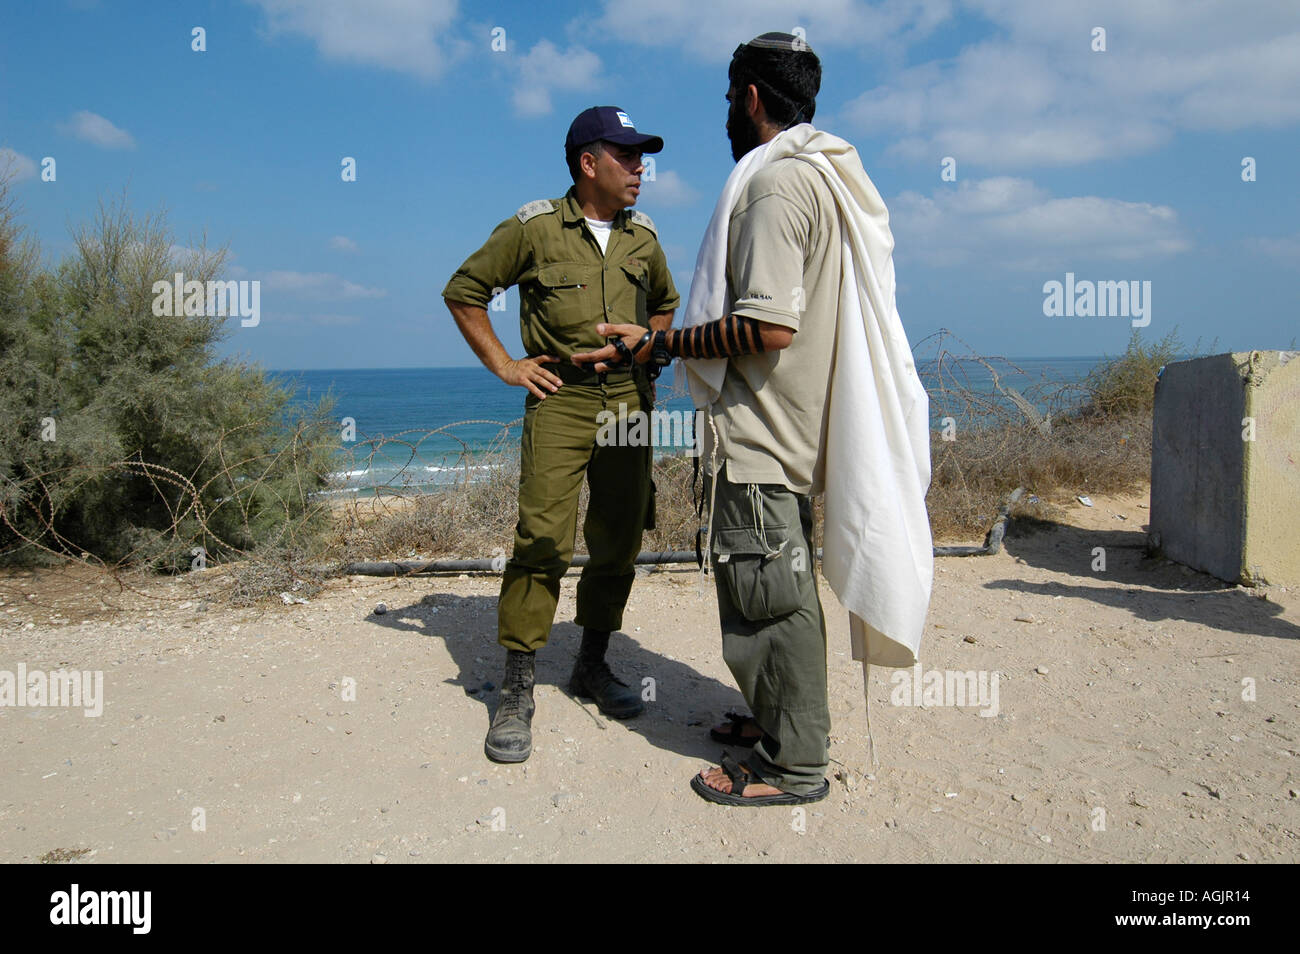 An Israeli military officer speaking to a Jewish settler wrapped with a Talit shawl in Gush Katif bloc of 17 Israeli settlements in Gaza strip Stock Photo